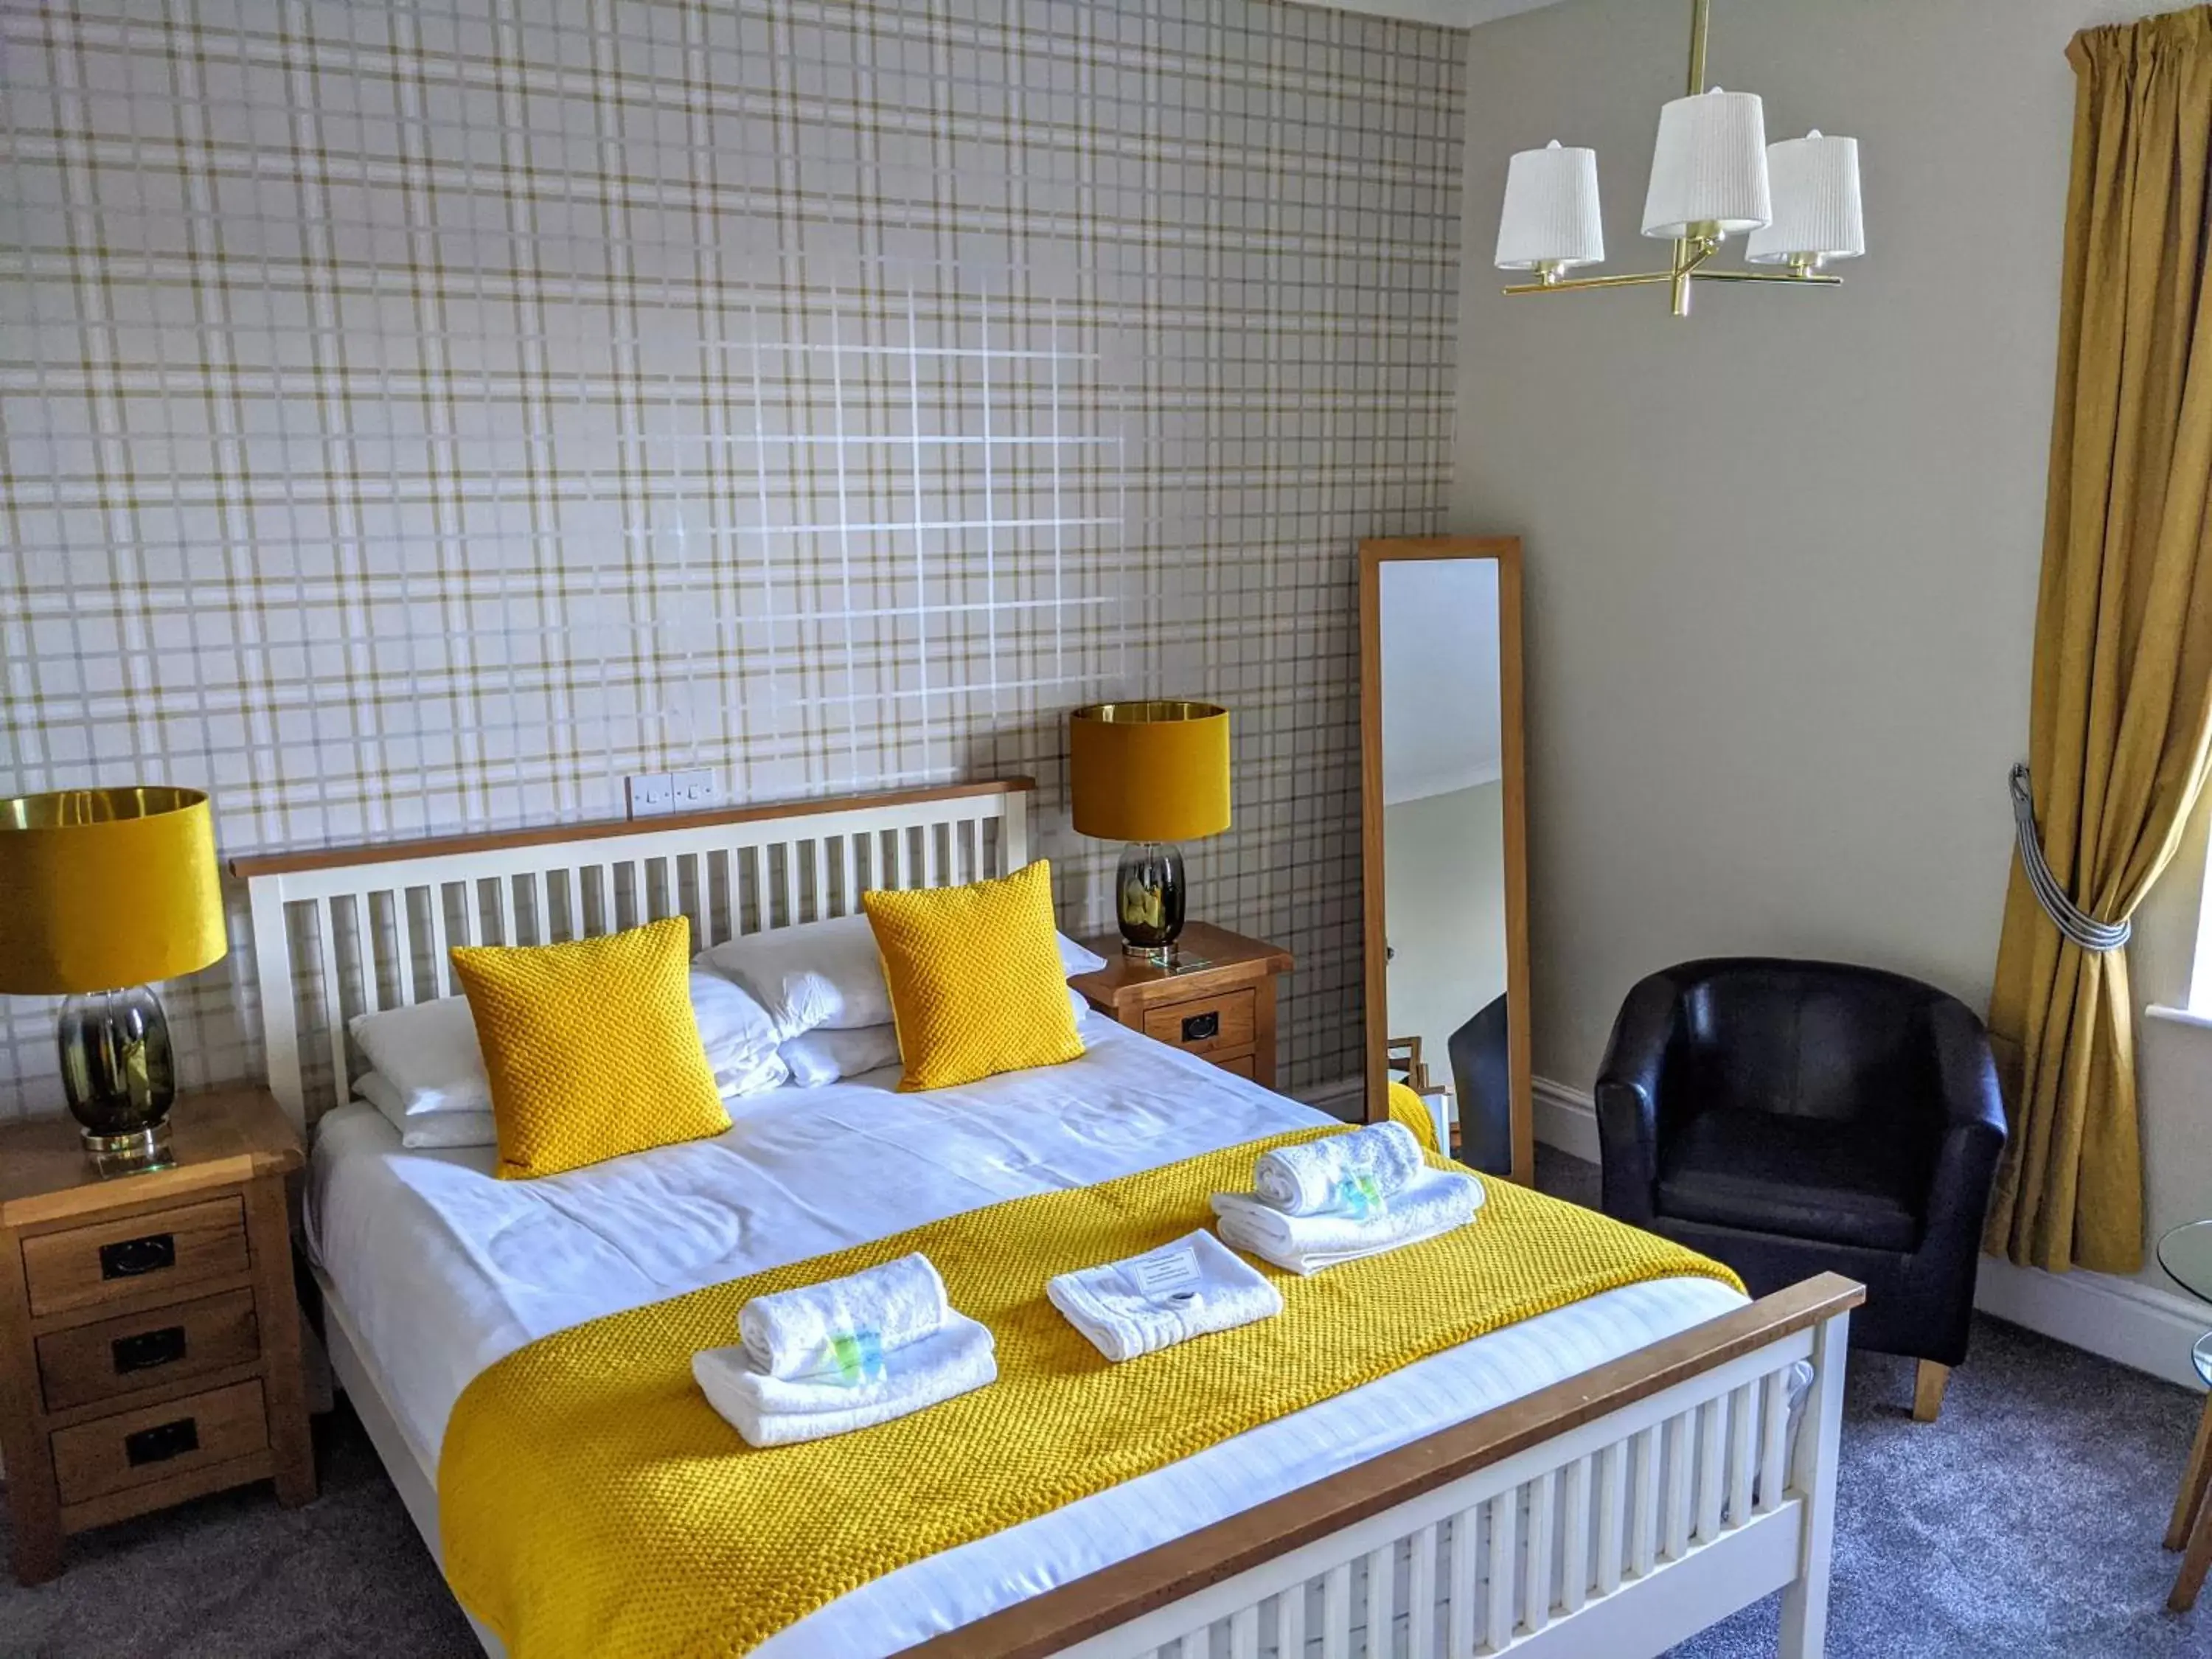 Deluxe Double Room with Sea View (Not Pet Friendly) in The Wildings Hotel & Tudno's Restaurant